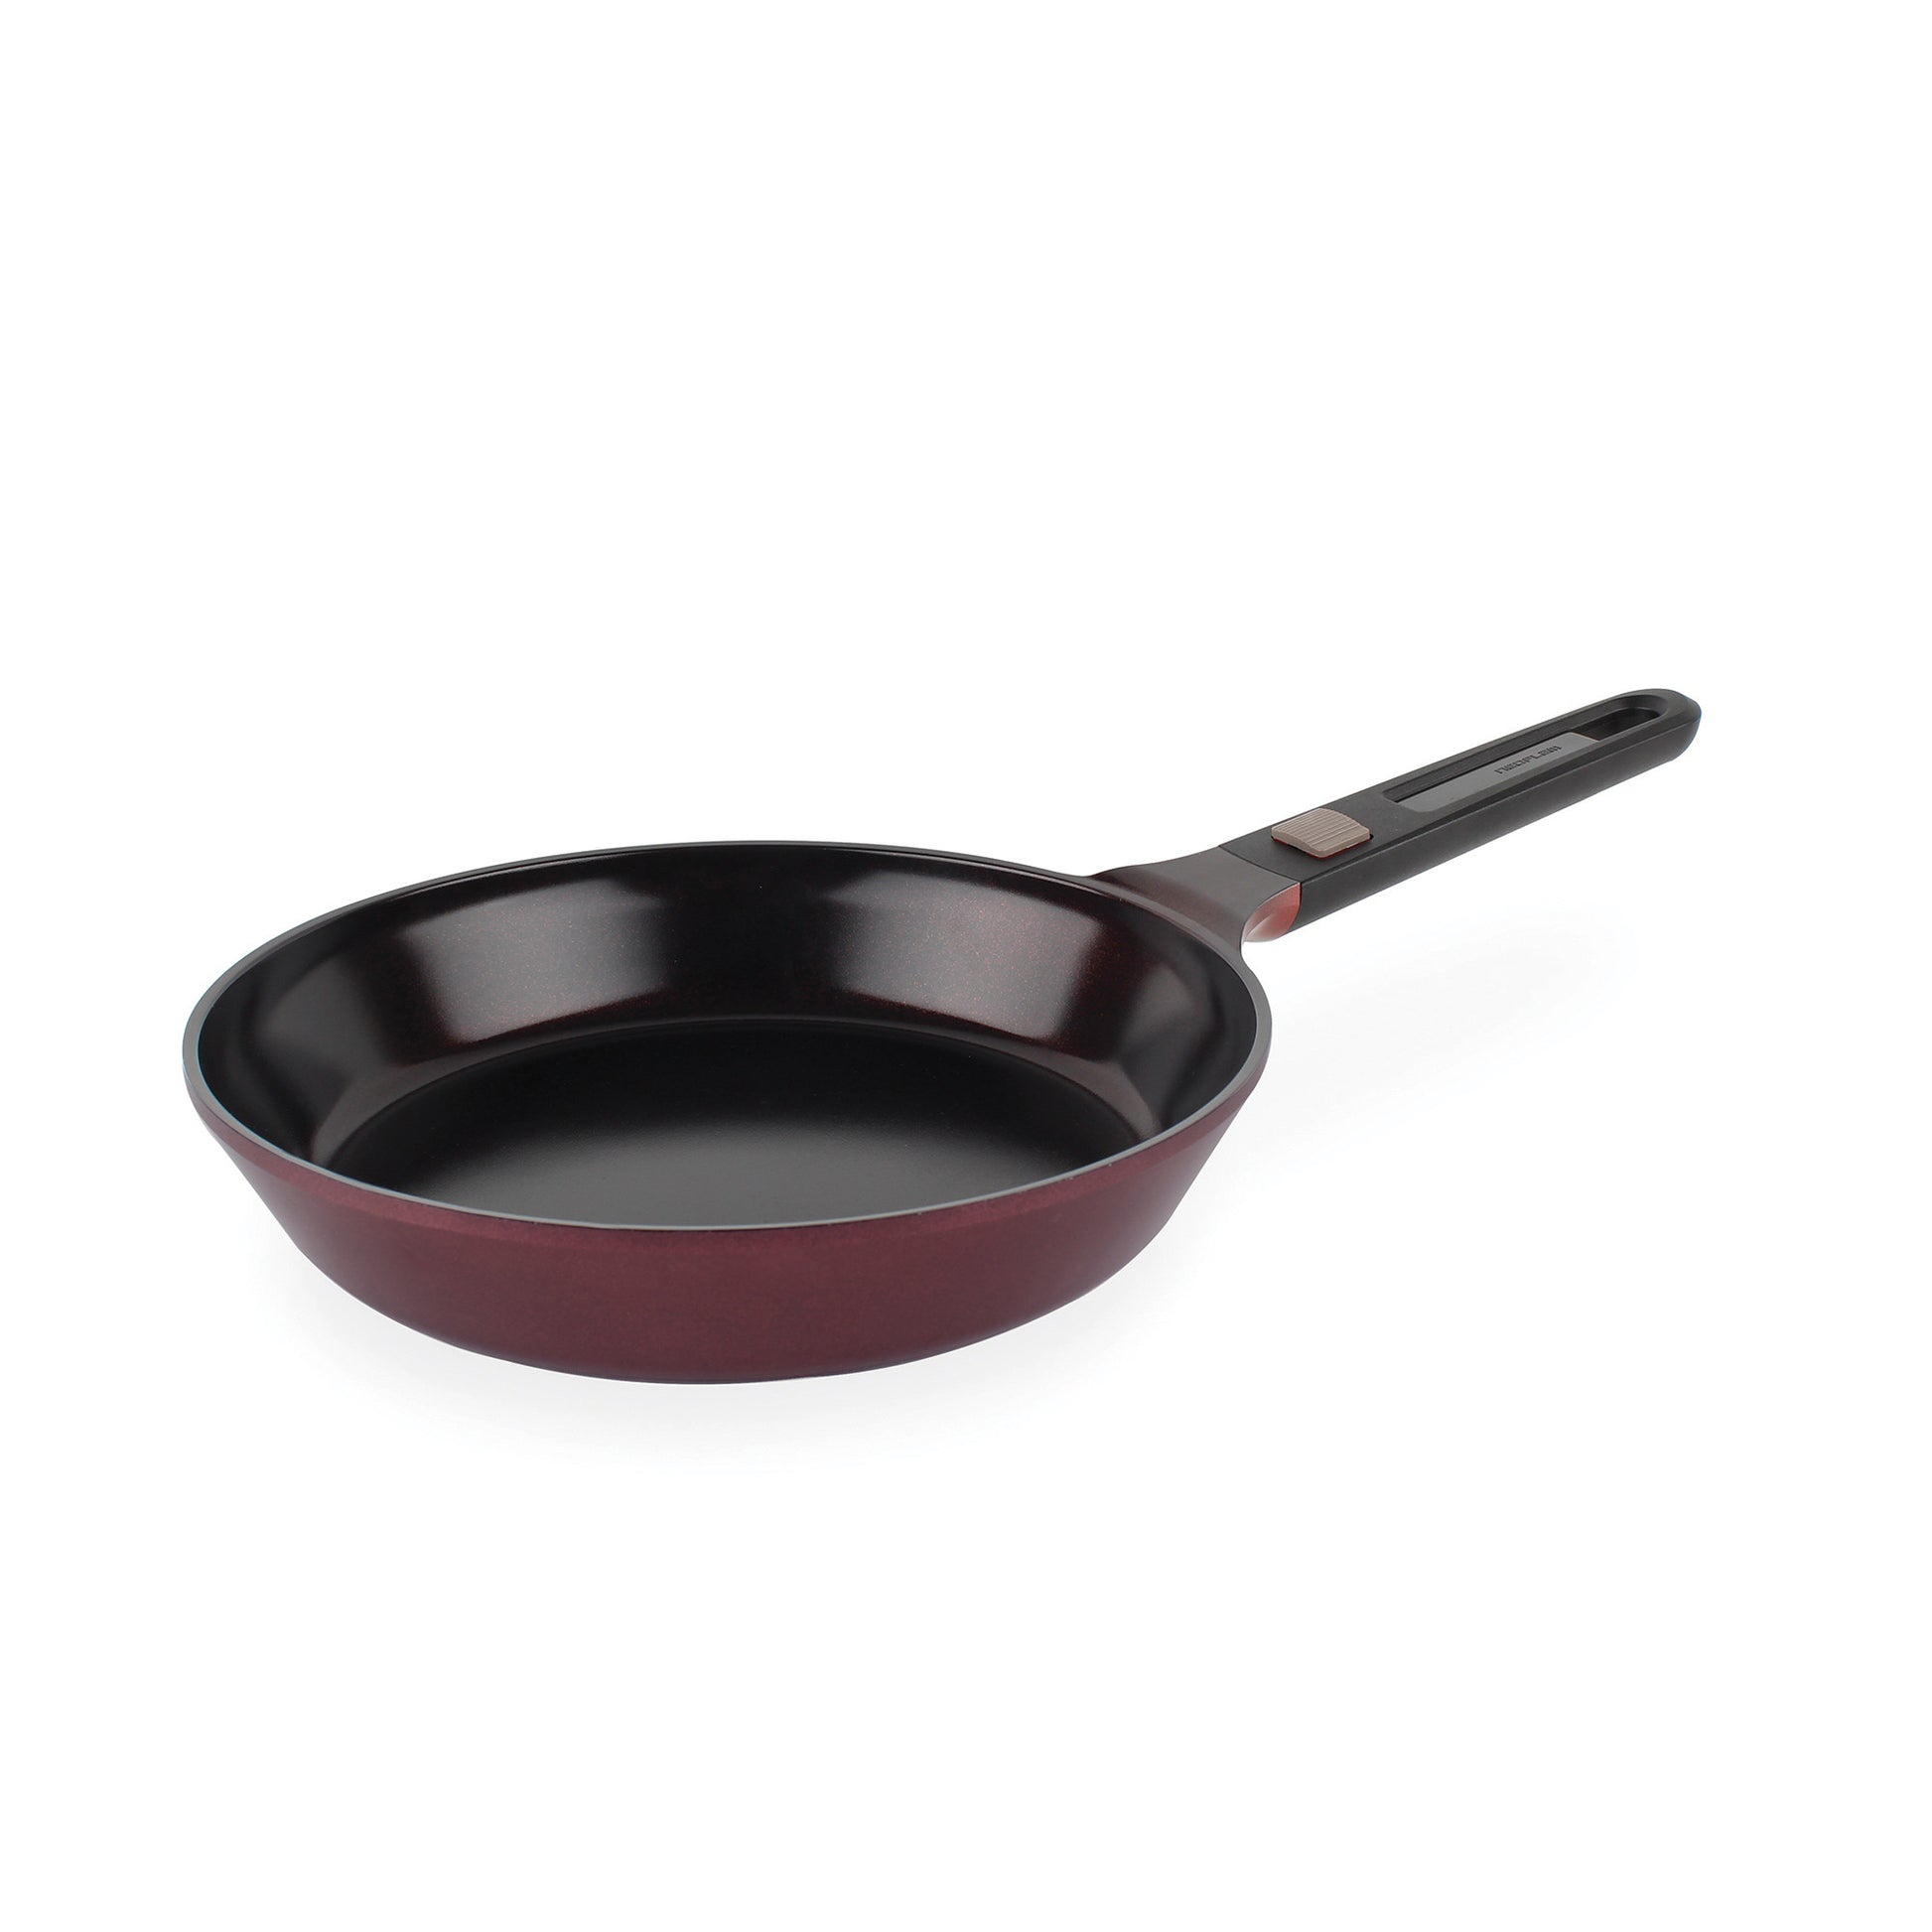 Neoflam 32 cm Cast Aluminum Frying Pan with Soft-Touch Handle and Ecolon  Non-Stick Coating